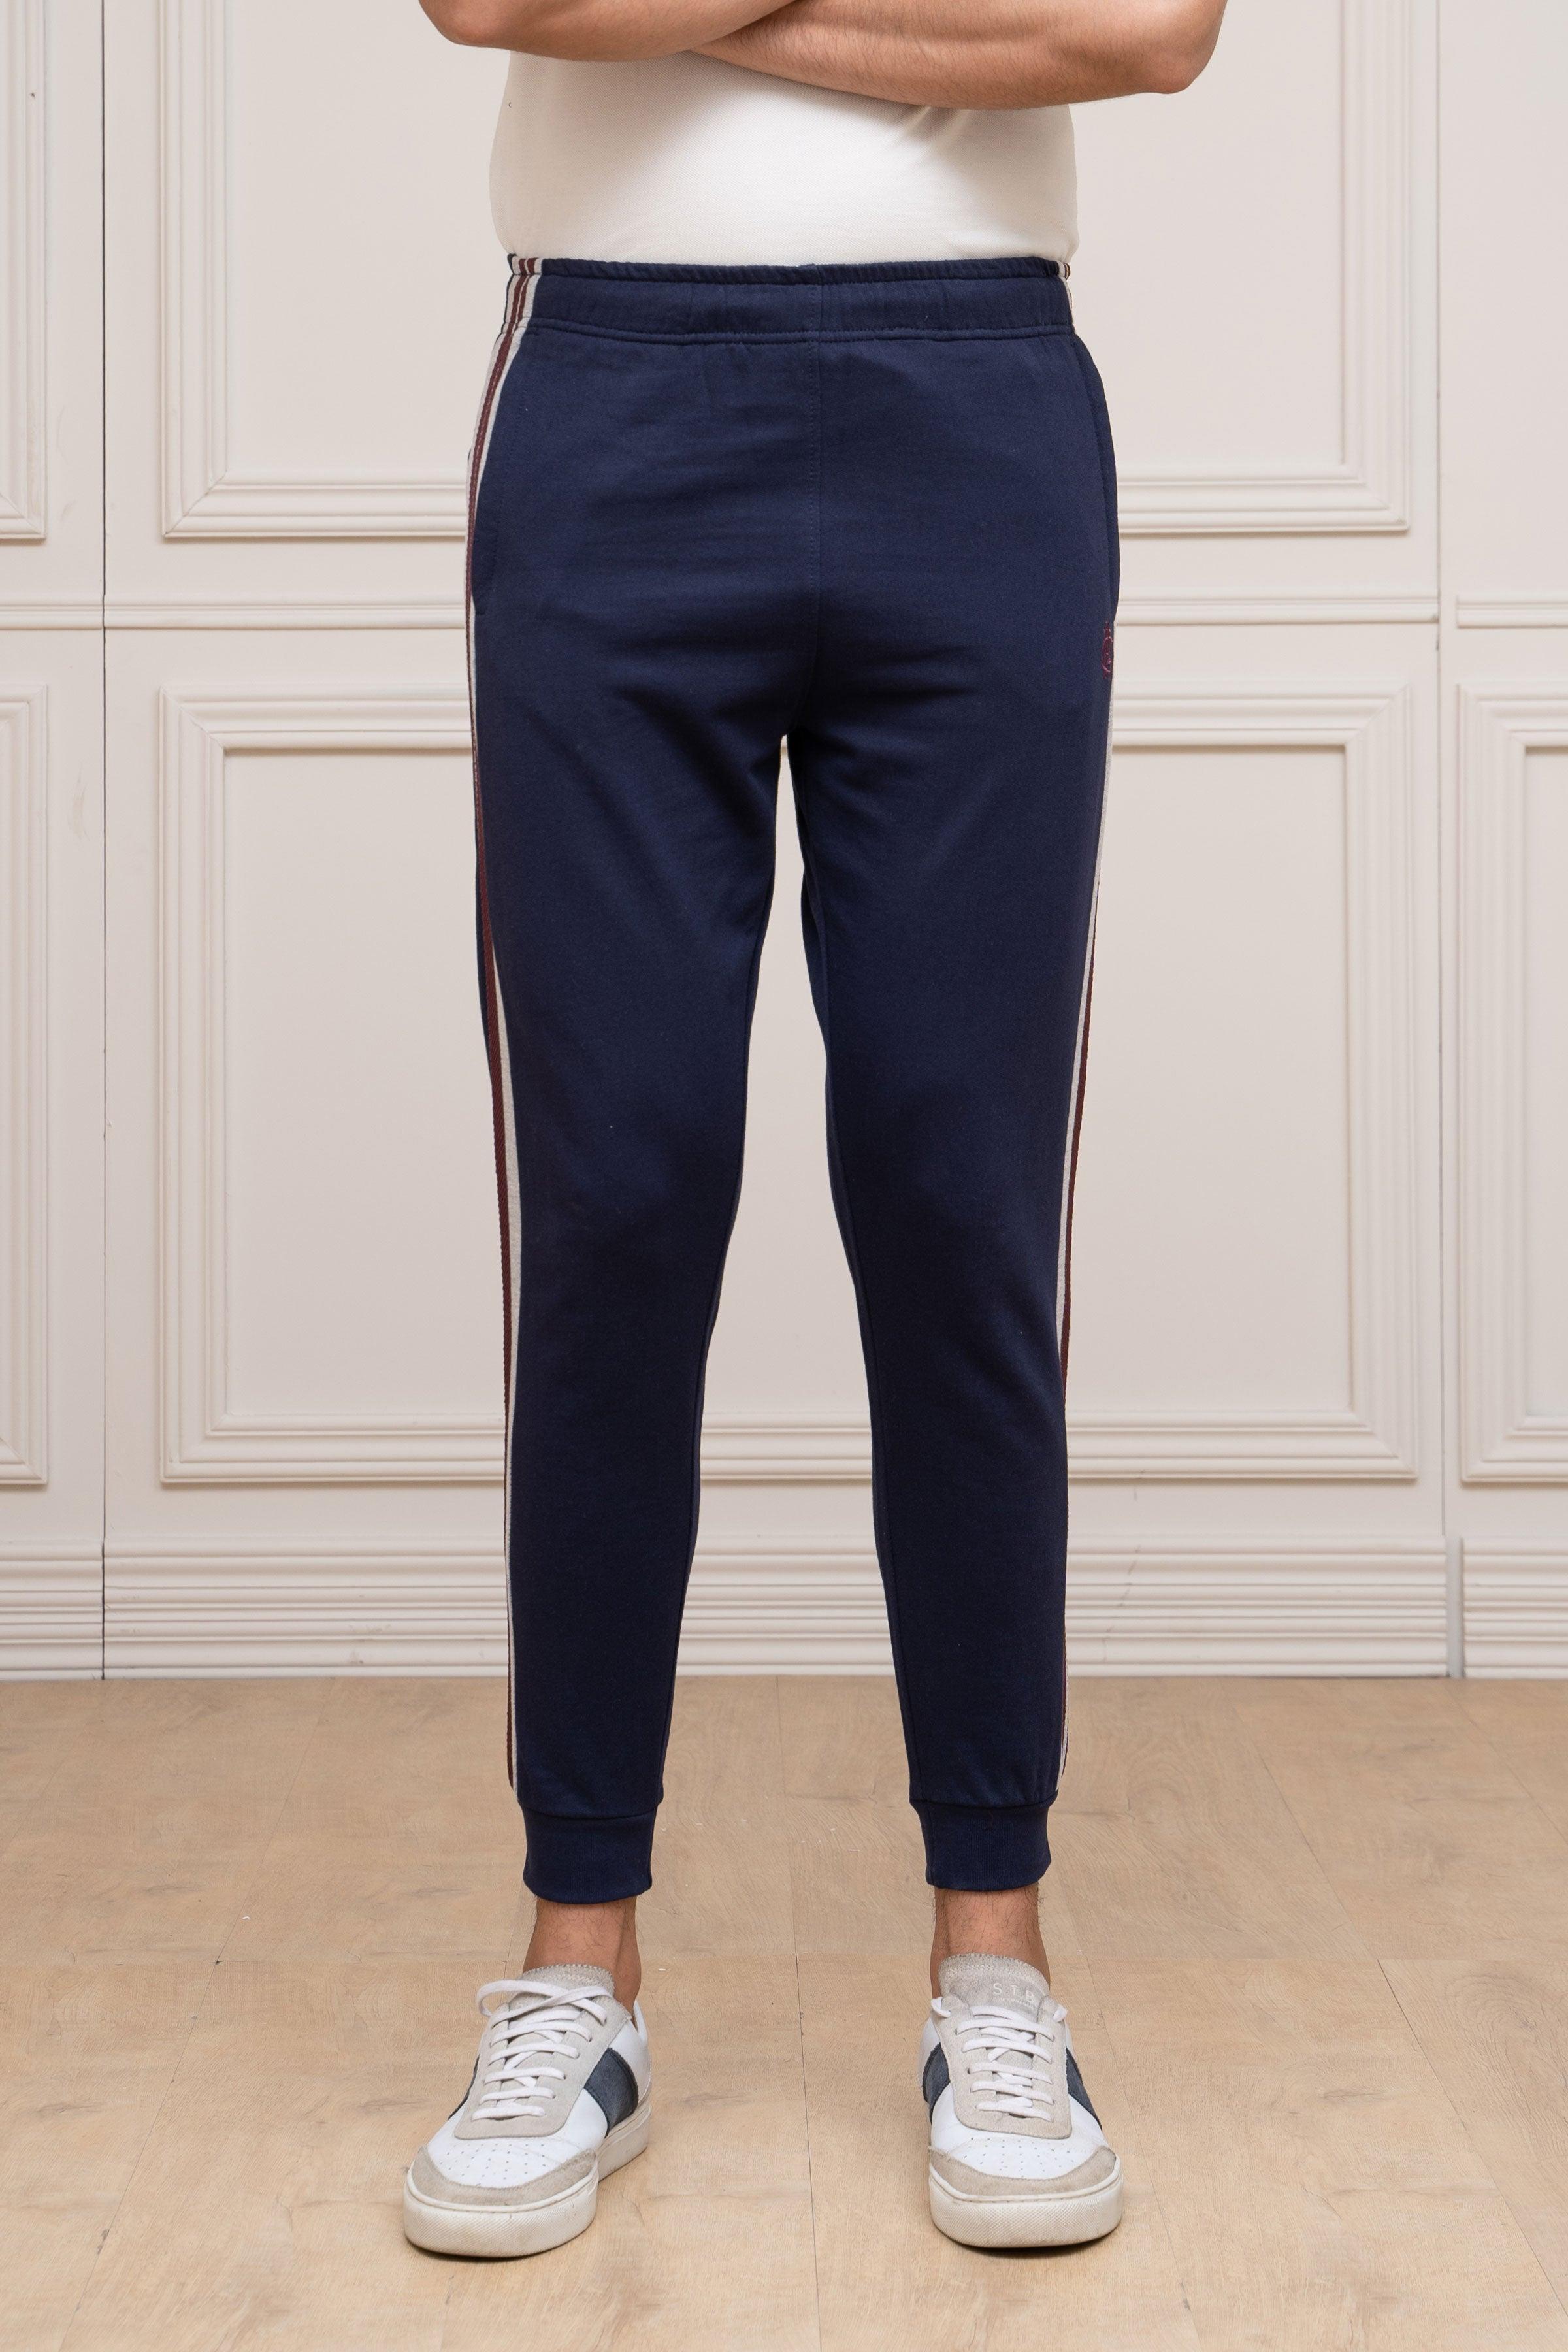 TERRY SIDE PANEL TROUSER NAVY at Charcoal Clothing